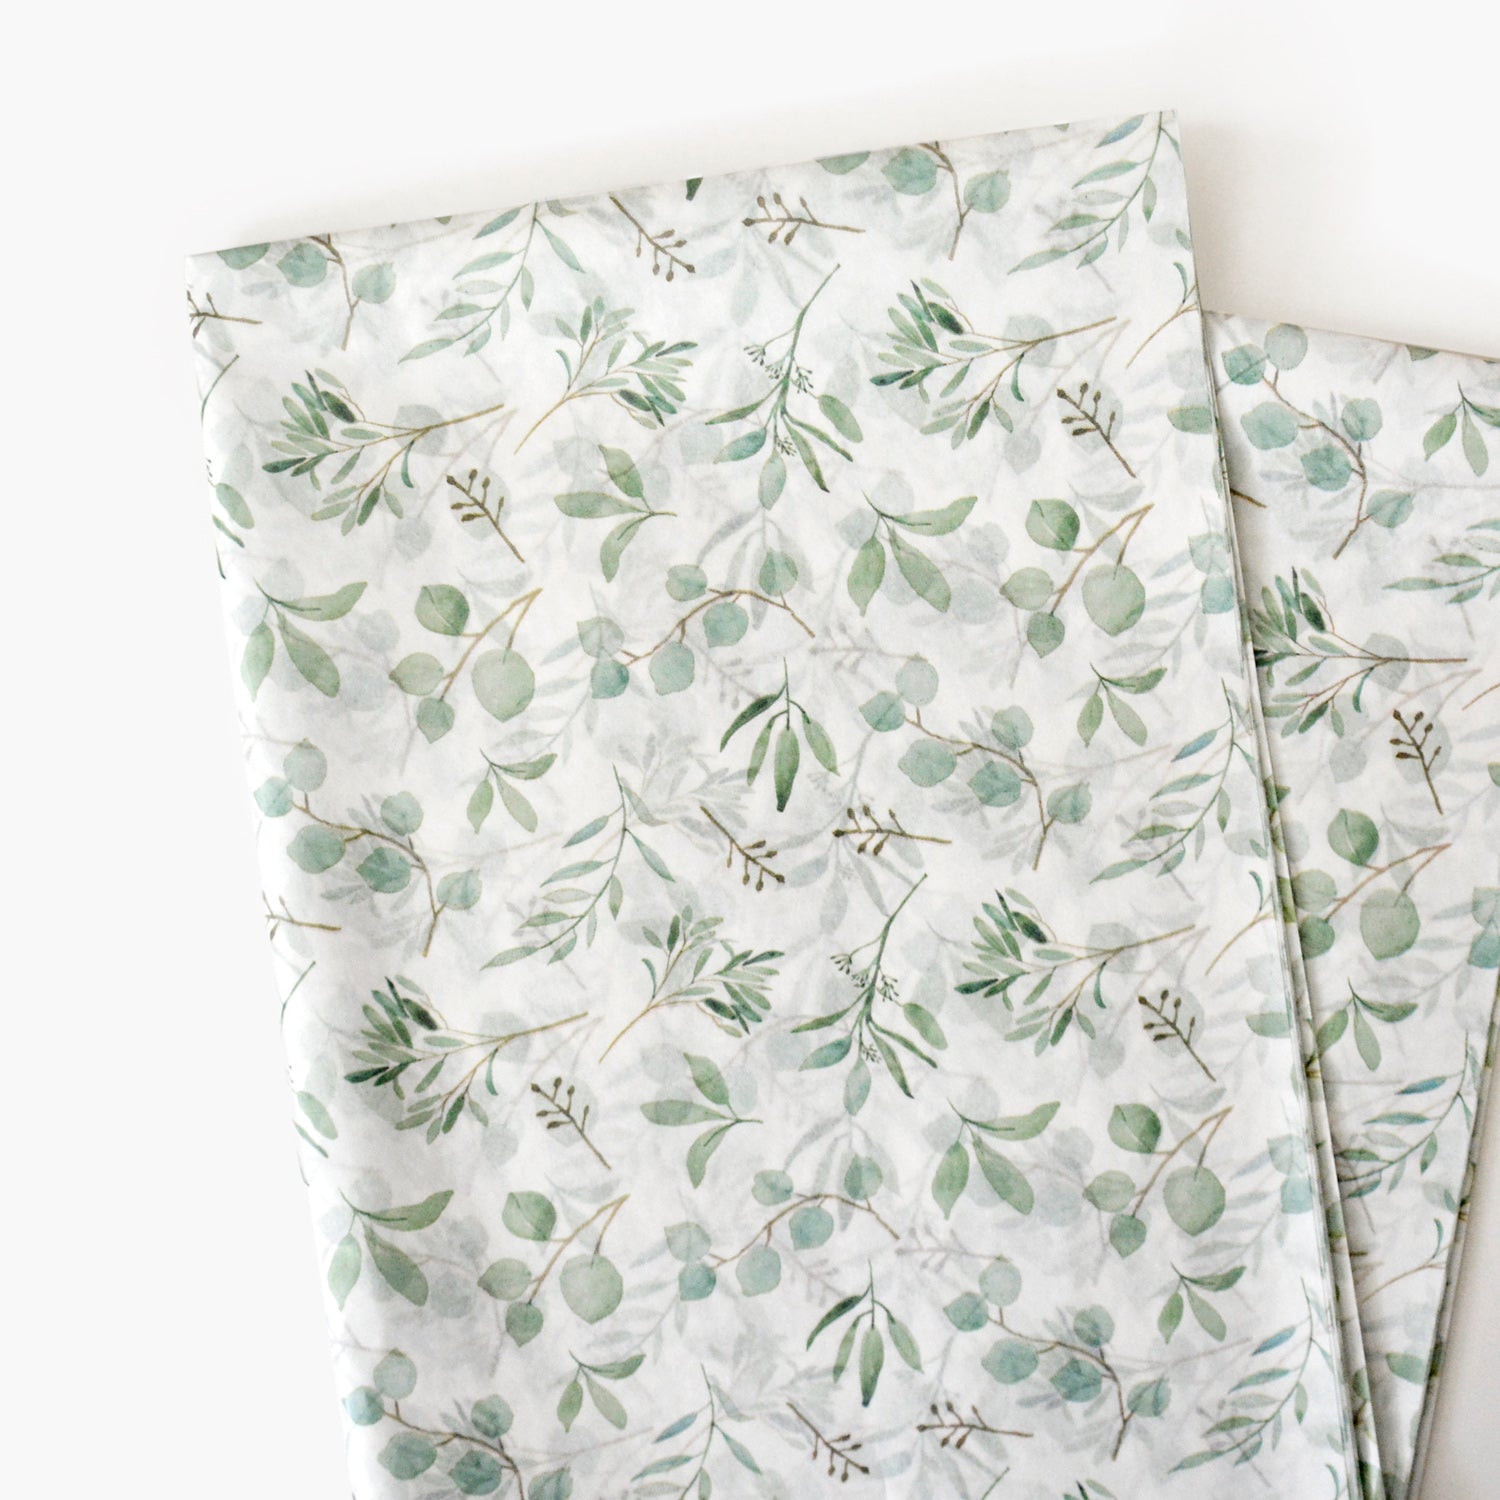 Eucalyptus Greeneries Patterned Tissue Paper - Boho Christmas Holiday Gift  Wrapping - Wedding Favor Wrap - Bridal Shower Gift Wrap - GenWooShop